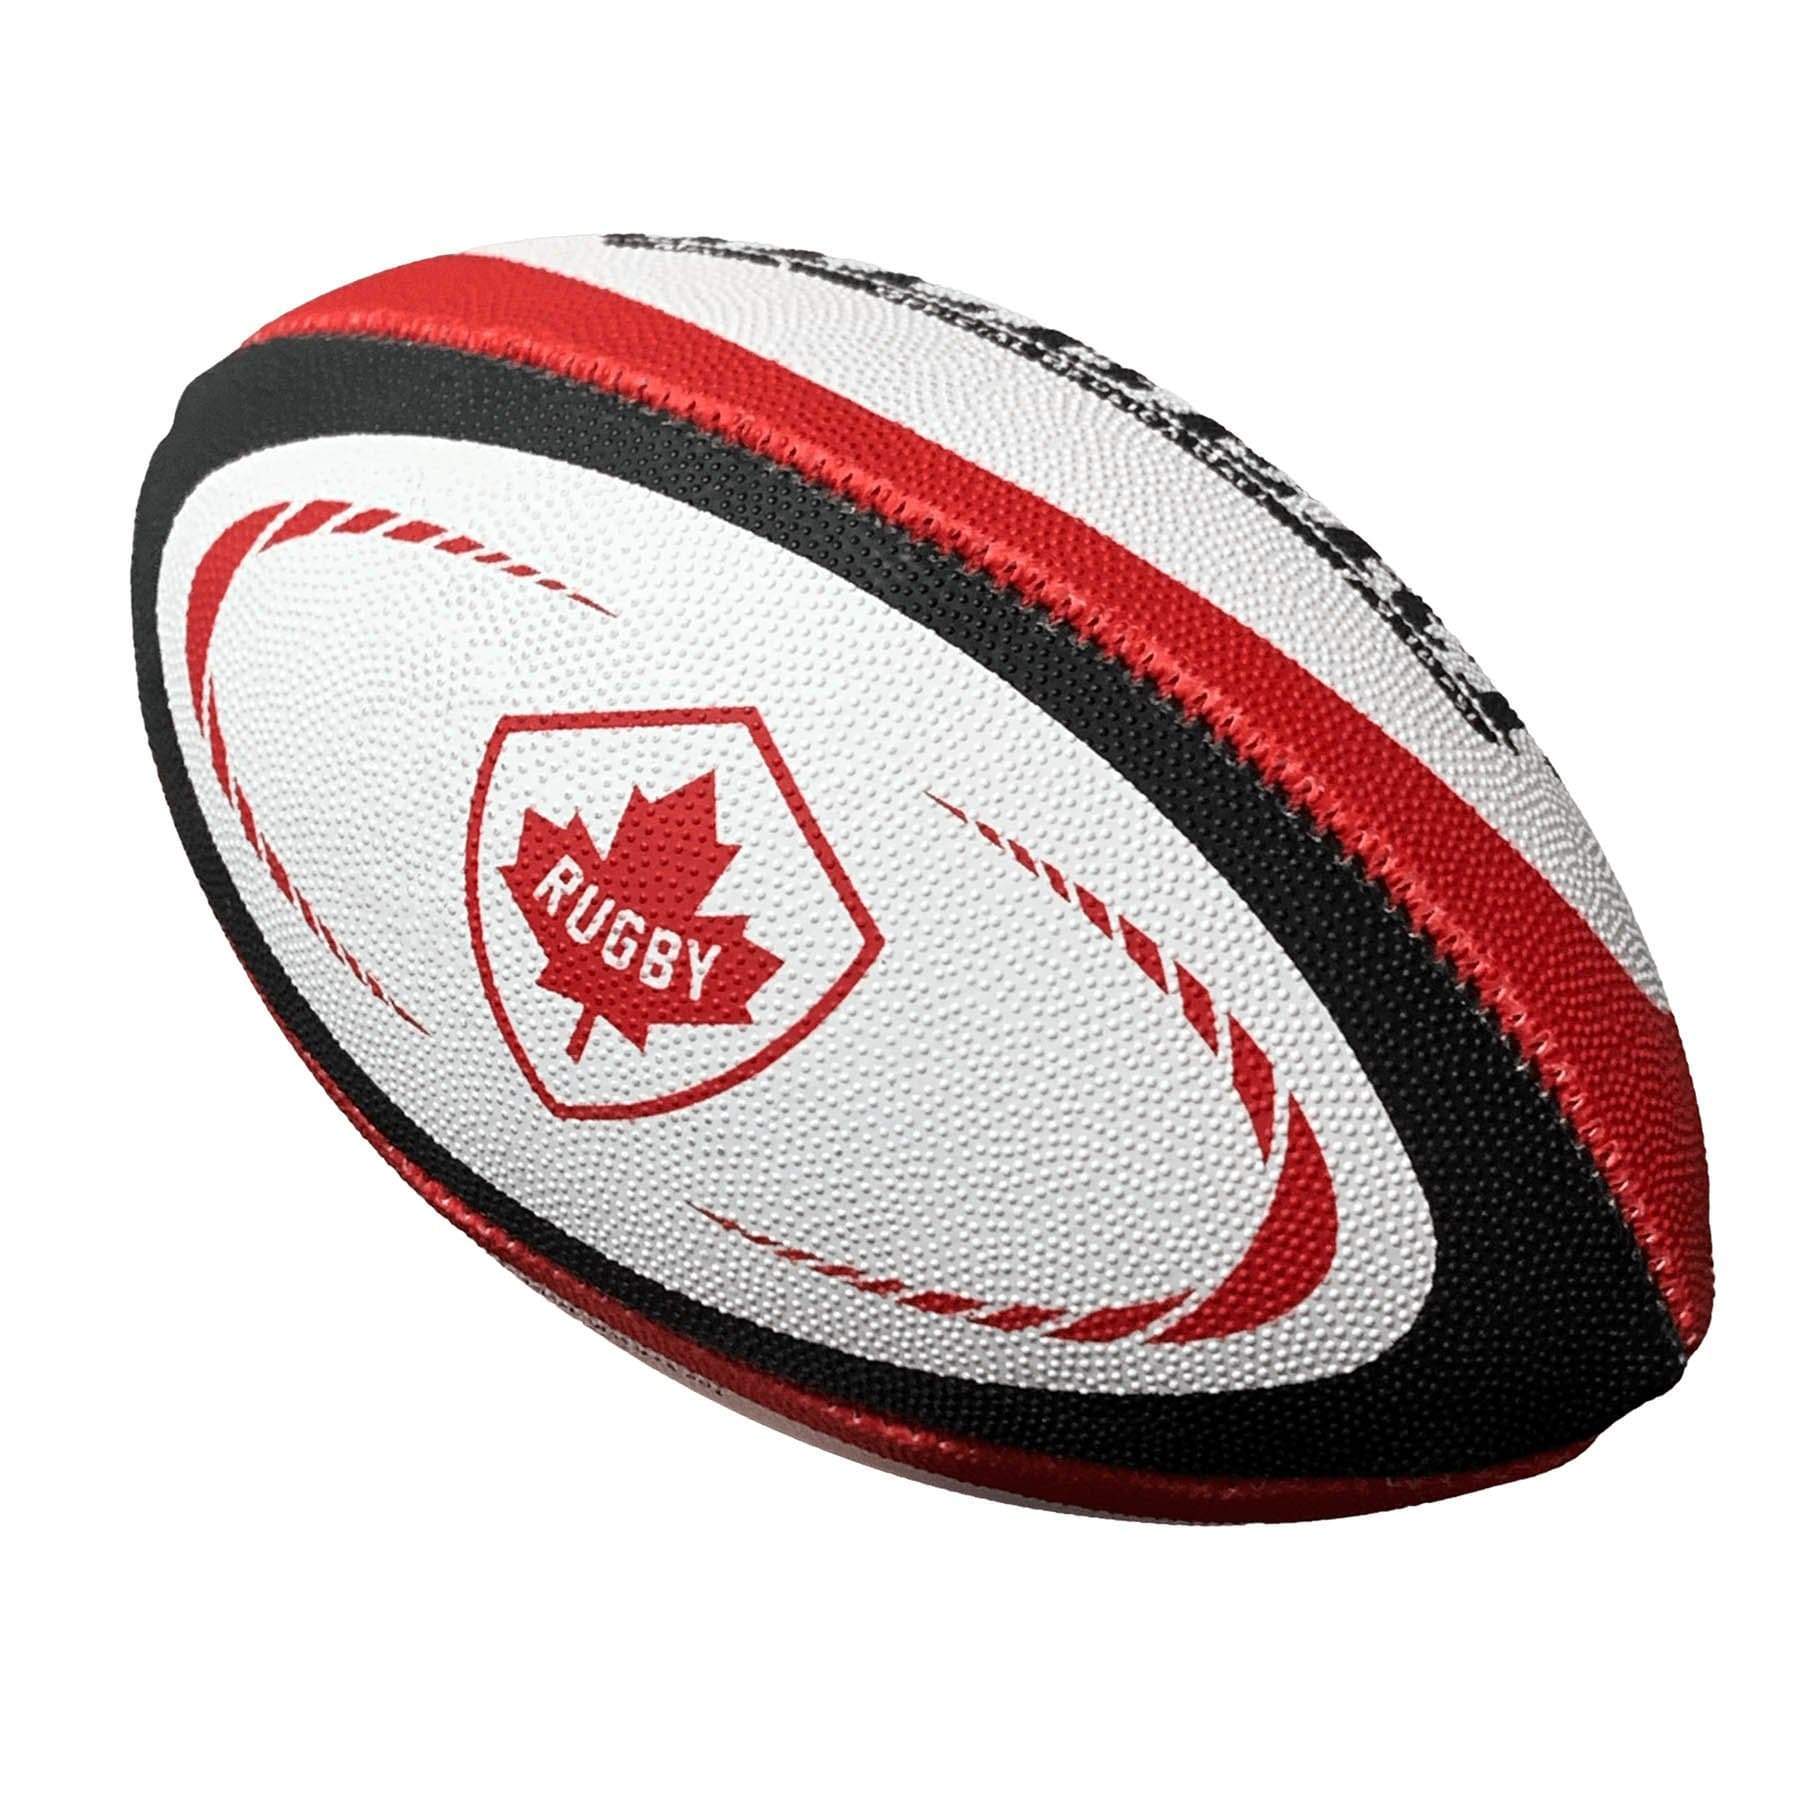 Gilbert Replica Mini Canada Rugby Ball Size Mini-Gilbert-Sports Replay - Sports Excellence